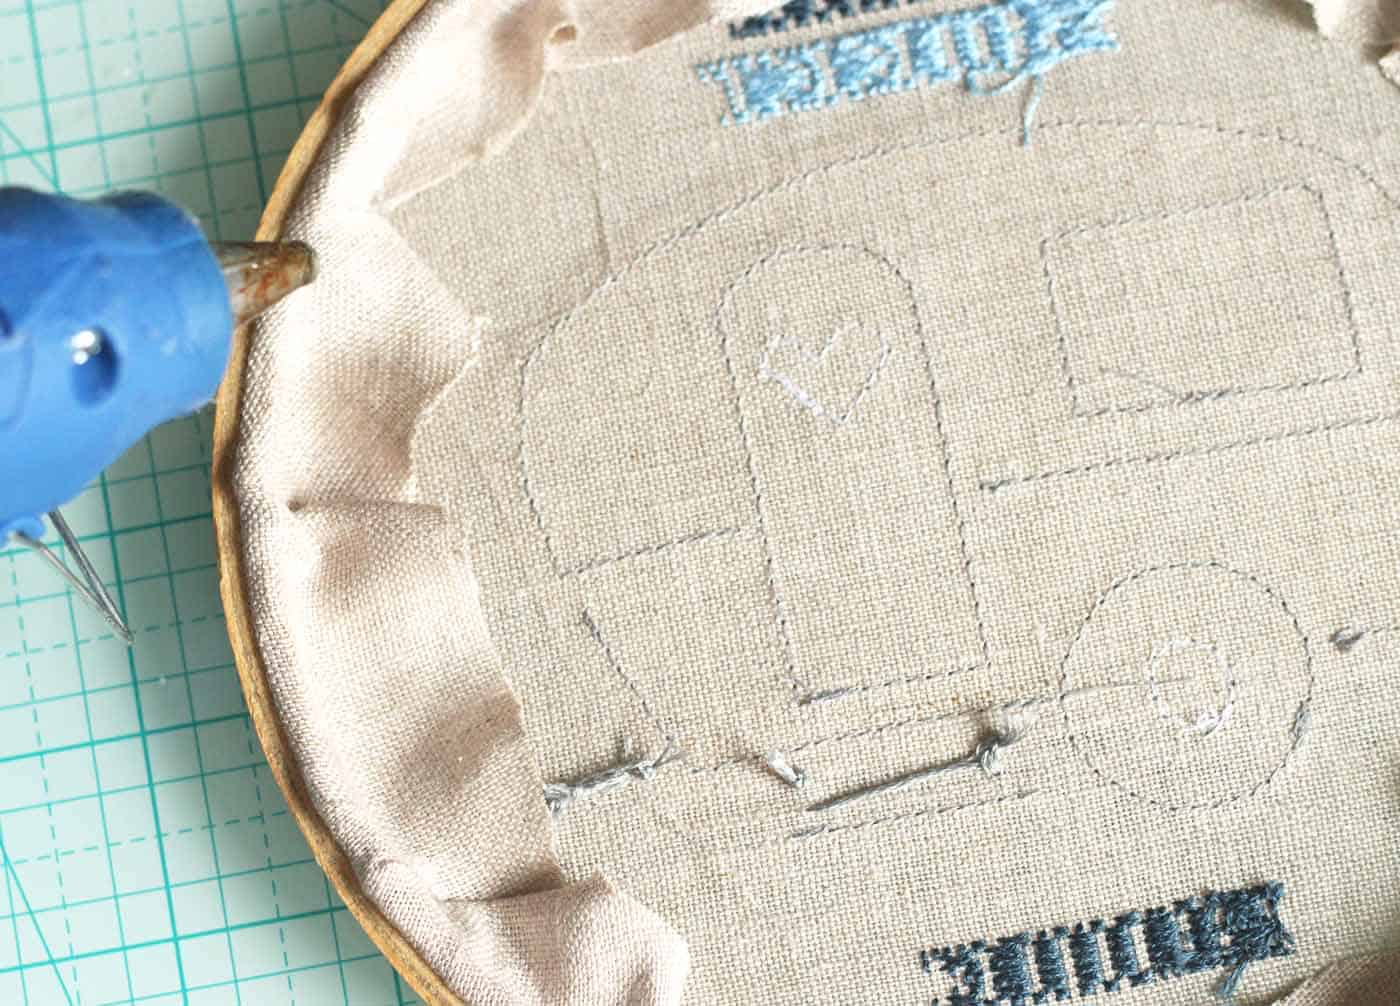 Finishing and folding the back on the embroidery with a hot glue gun